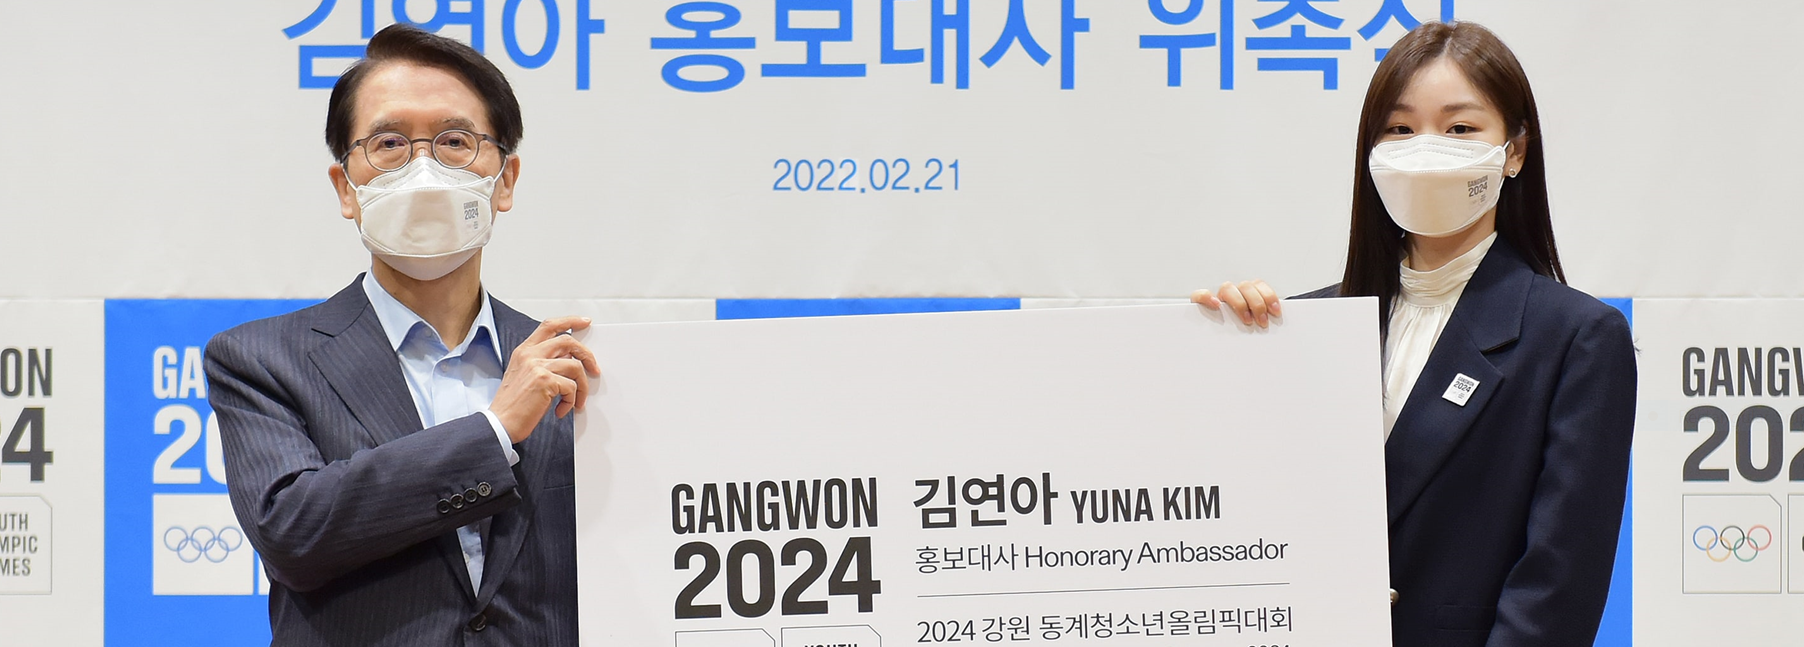 South Korea's former Olympic skating champion Yuna Kim has been appointed honorary ambassador for the Gangwon 2024 Youth Olympics ©Gangwon2024